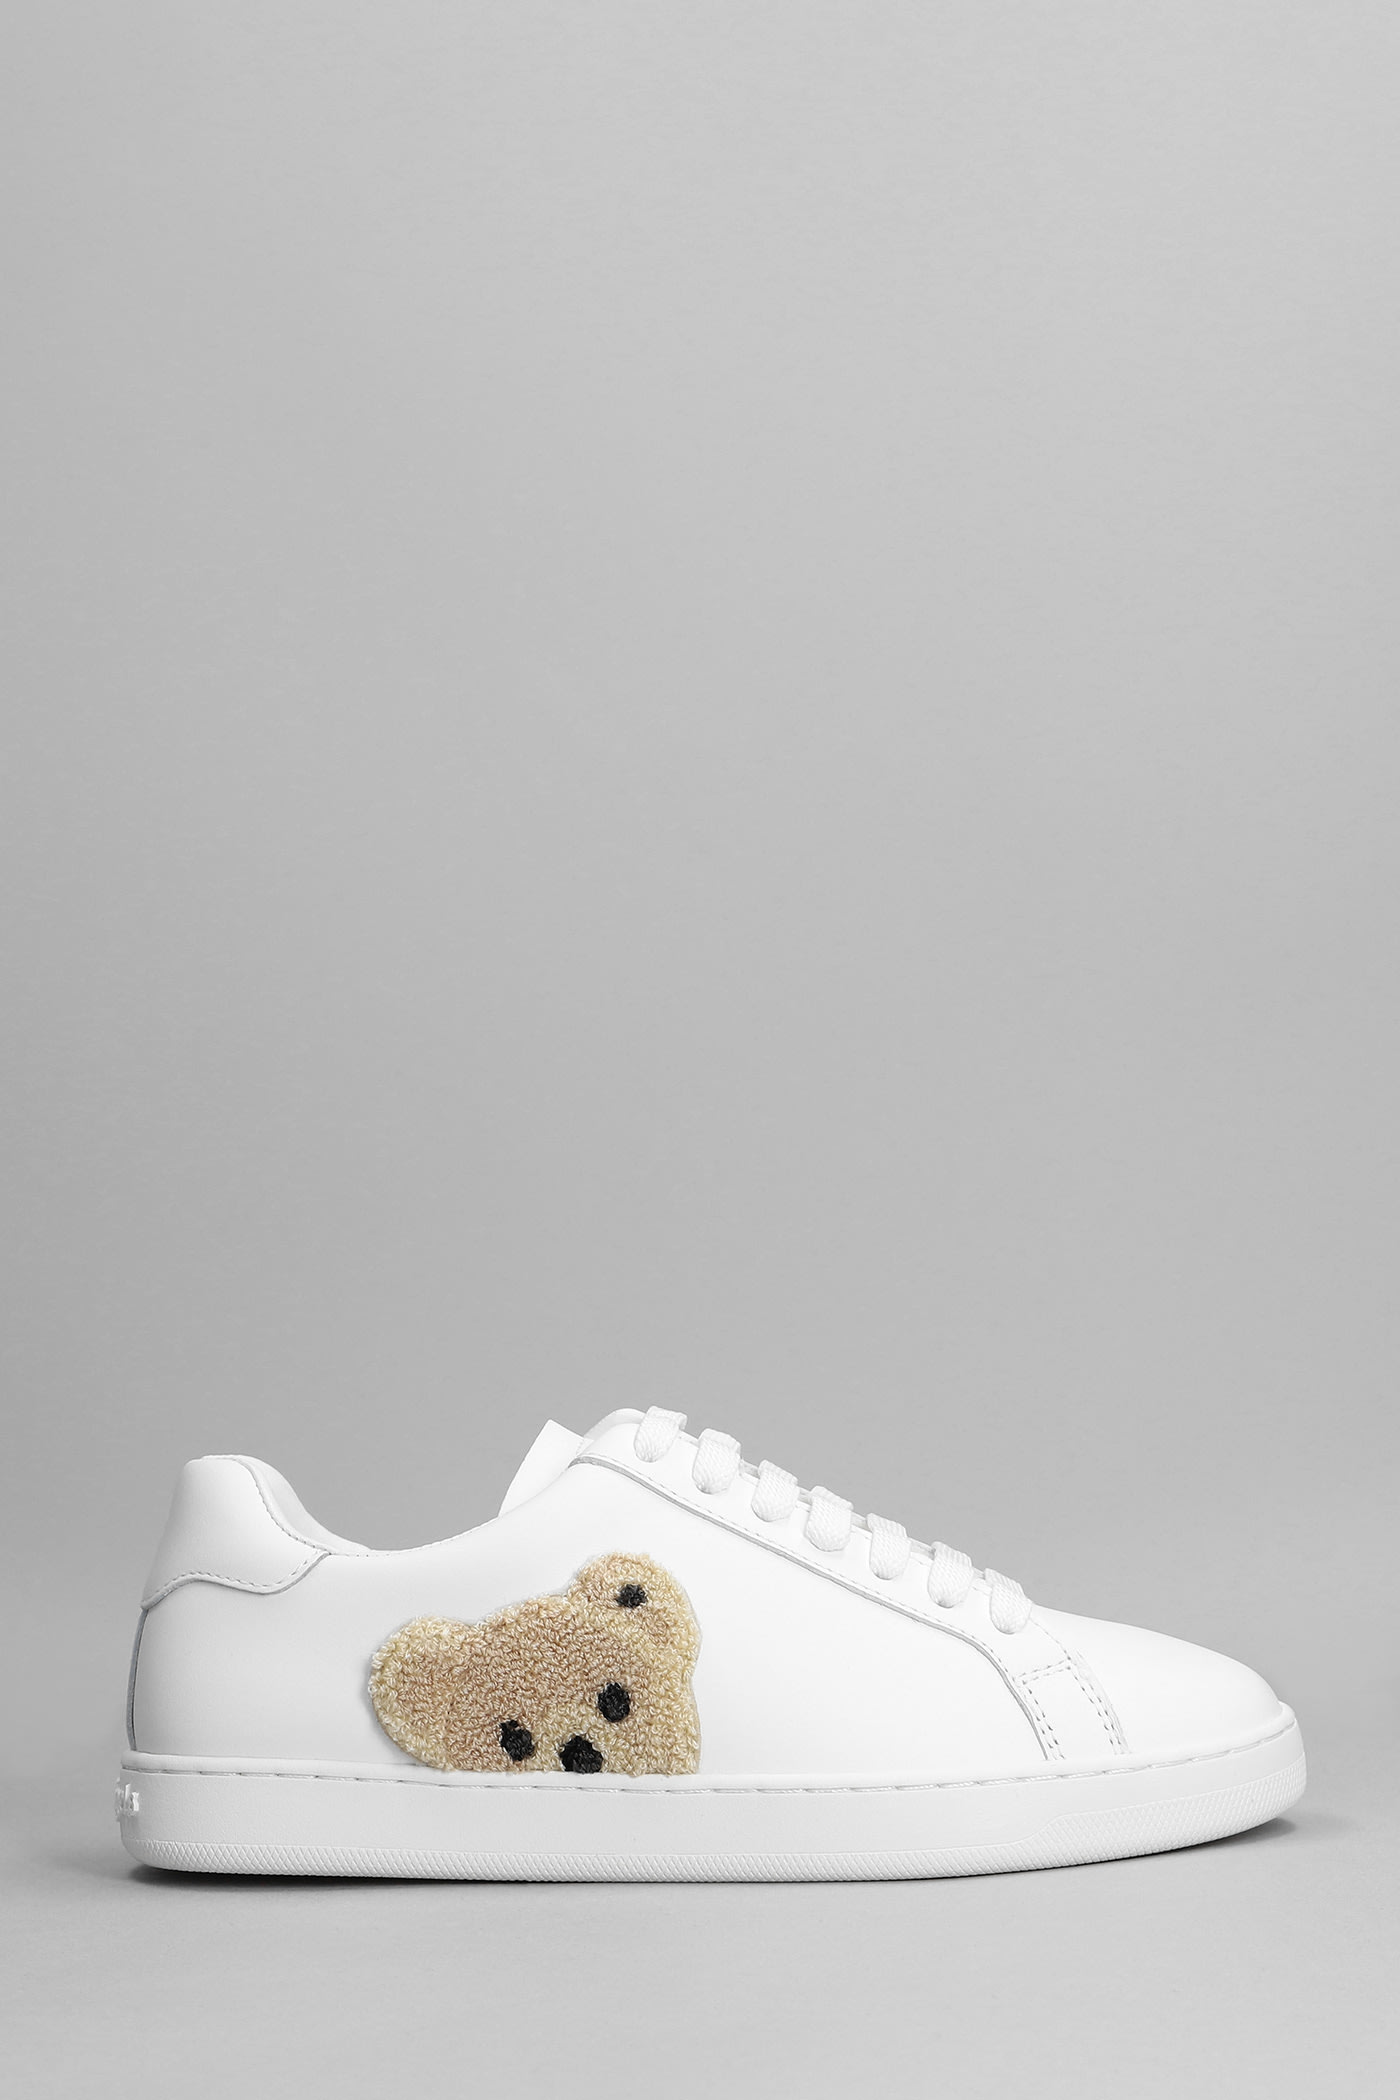 Palm Angels Sneakers In White Leather